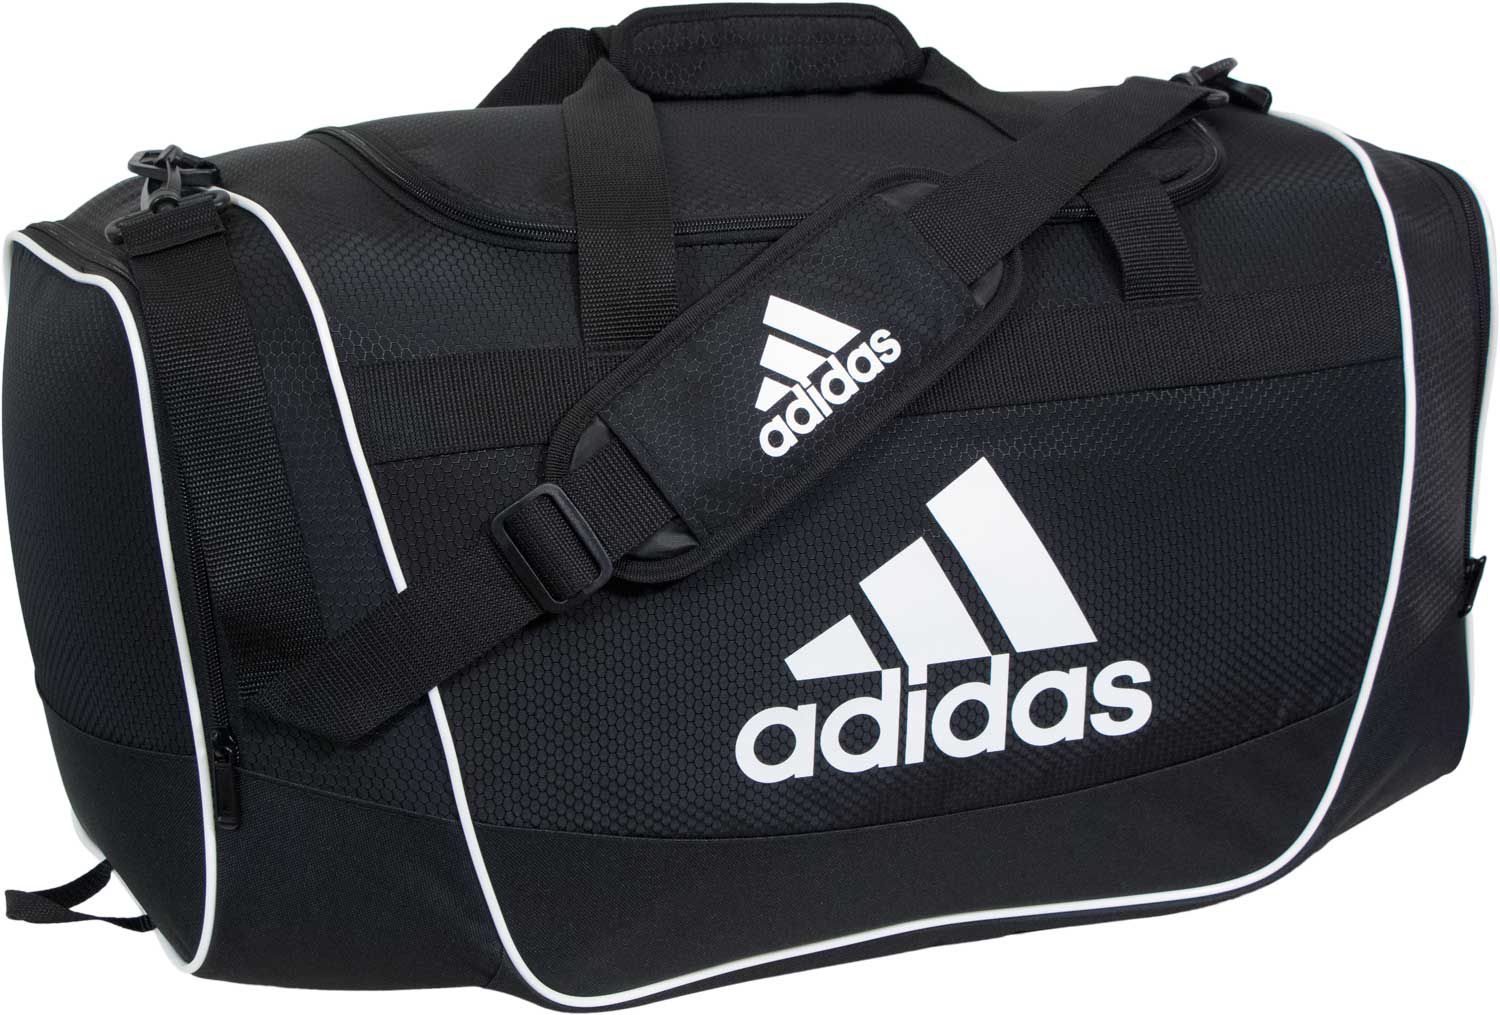 Gym Bags & Workout Bags | DICK'S Sporting Goods